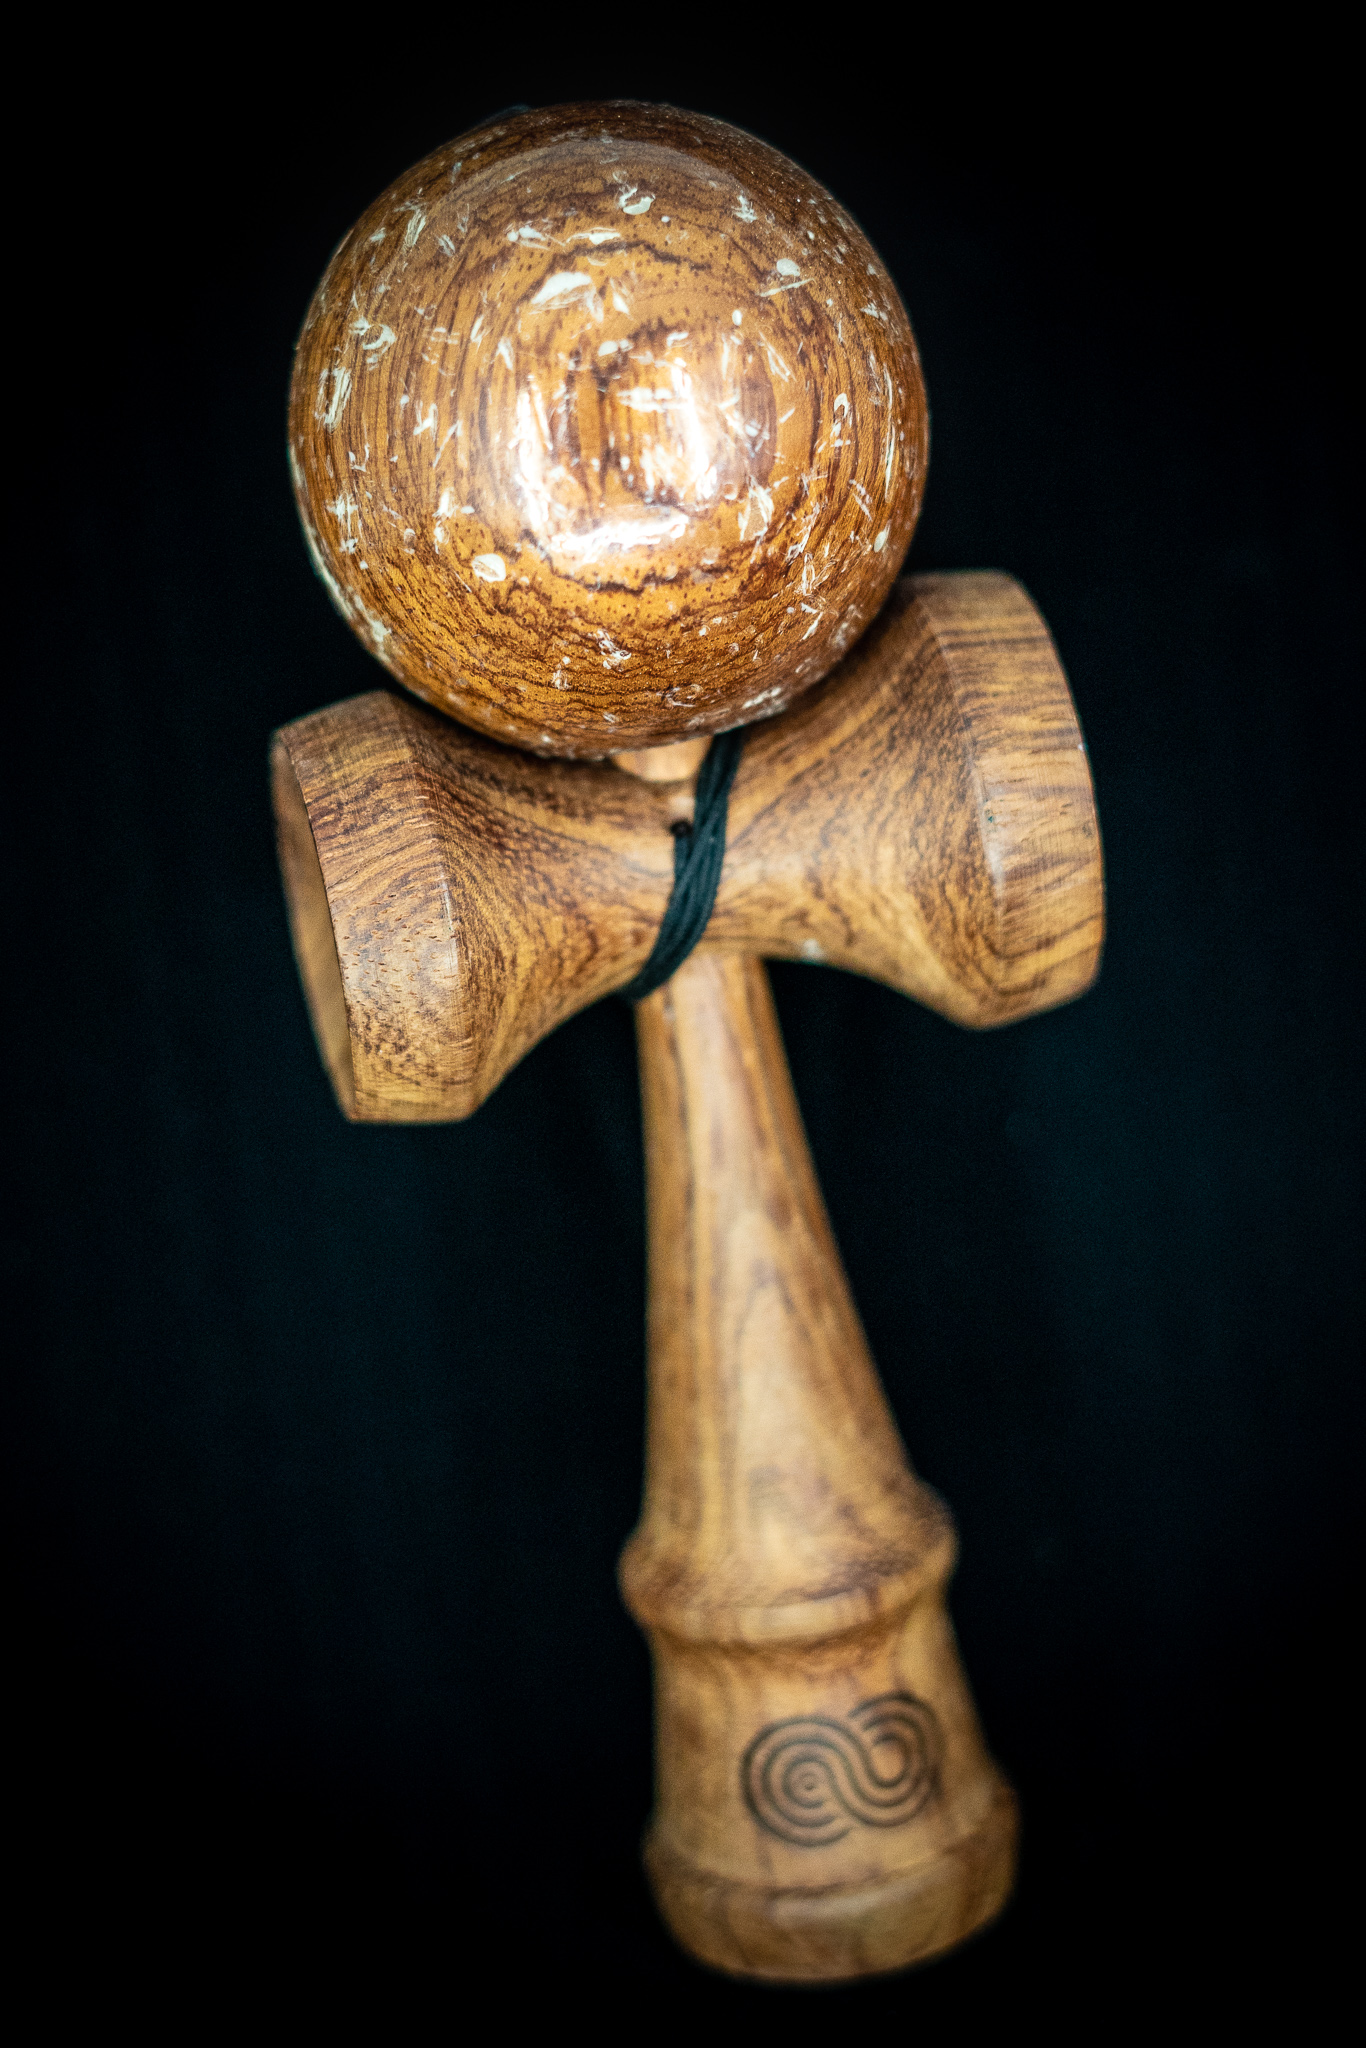 Kendama on black background. A wood toy consisting of a handle, two cups, a spike, and a ball attached to a string. Made of dark mahogany 